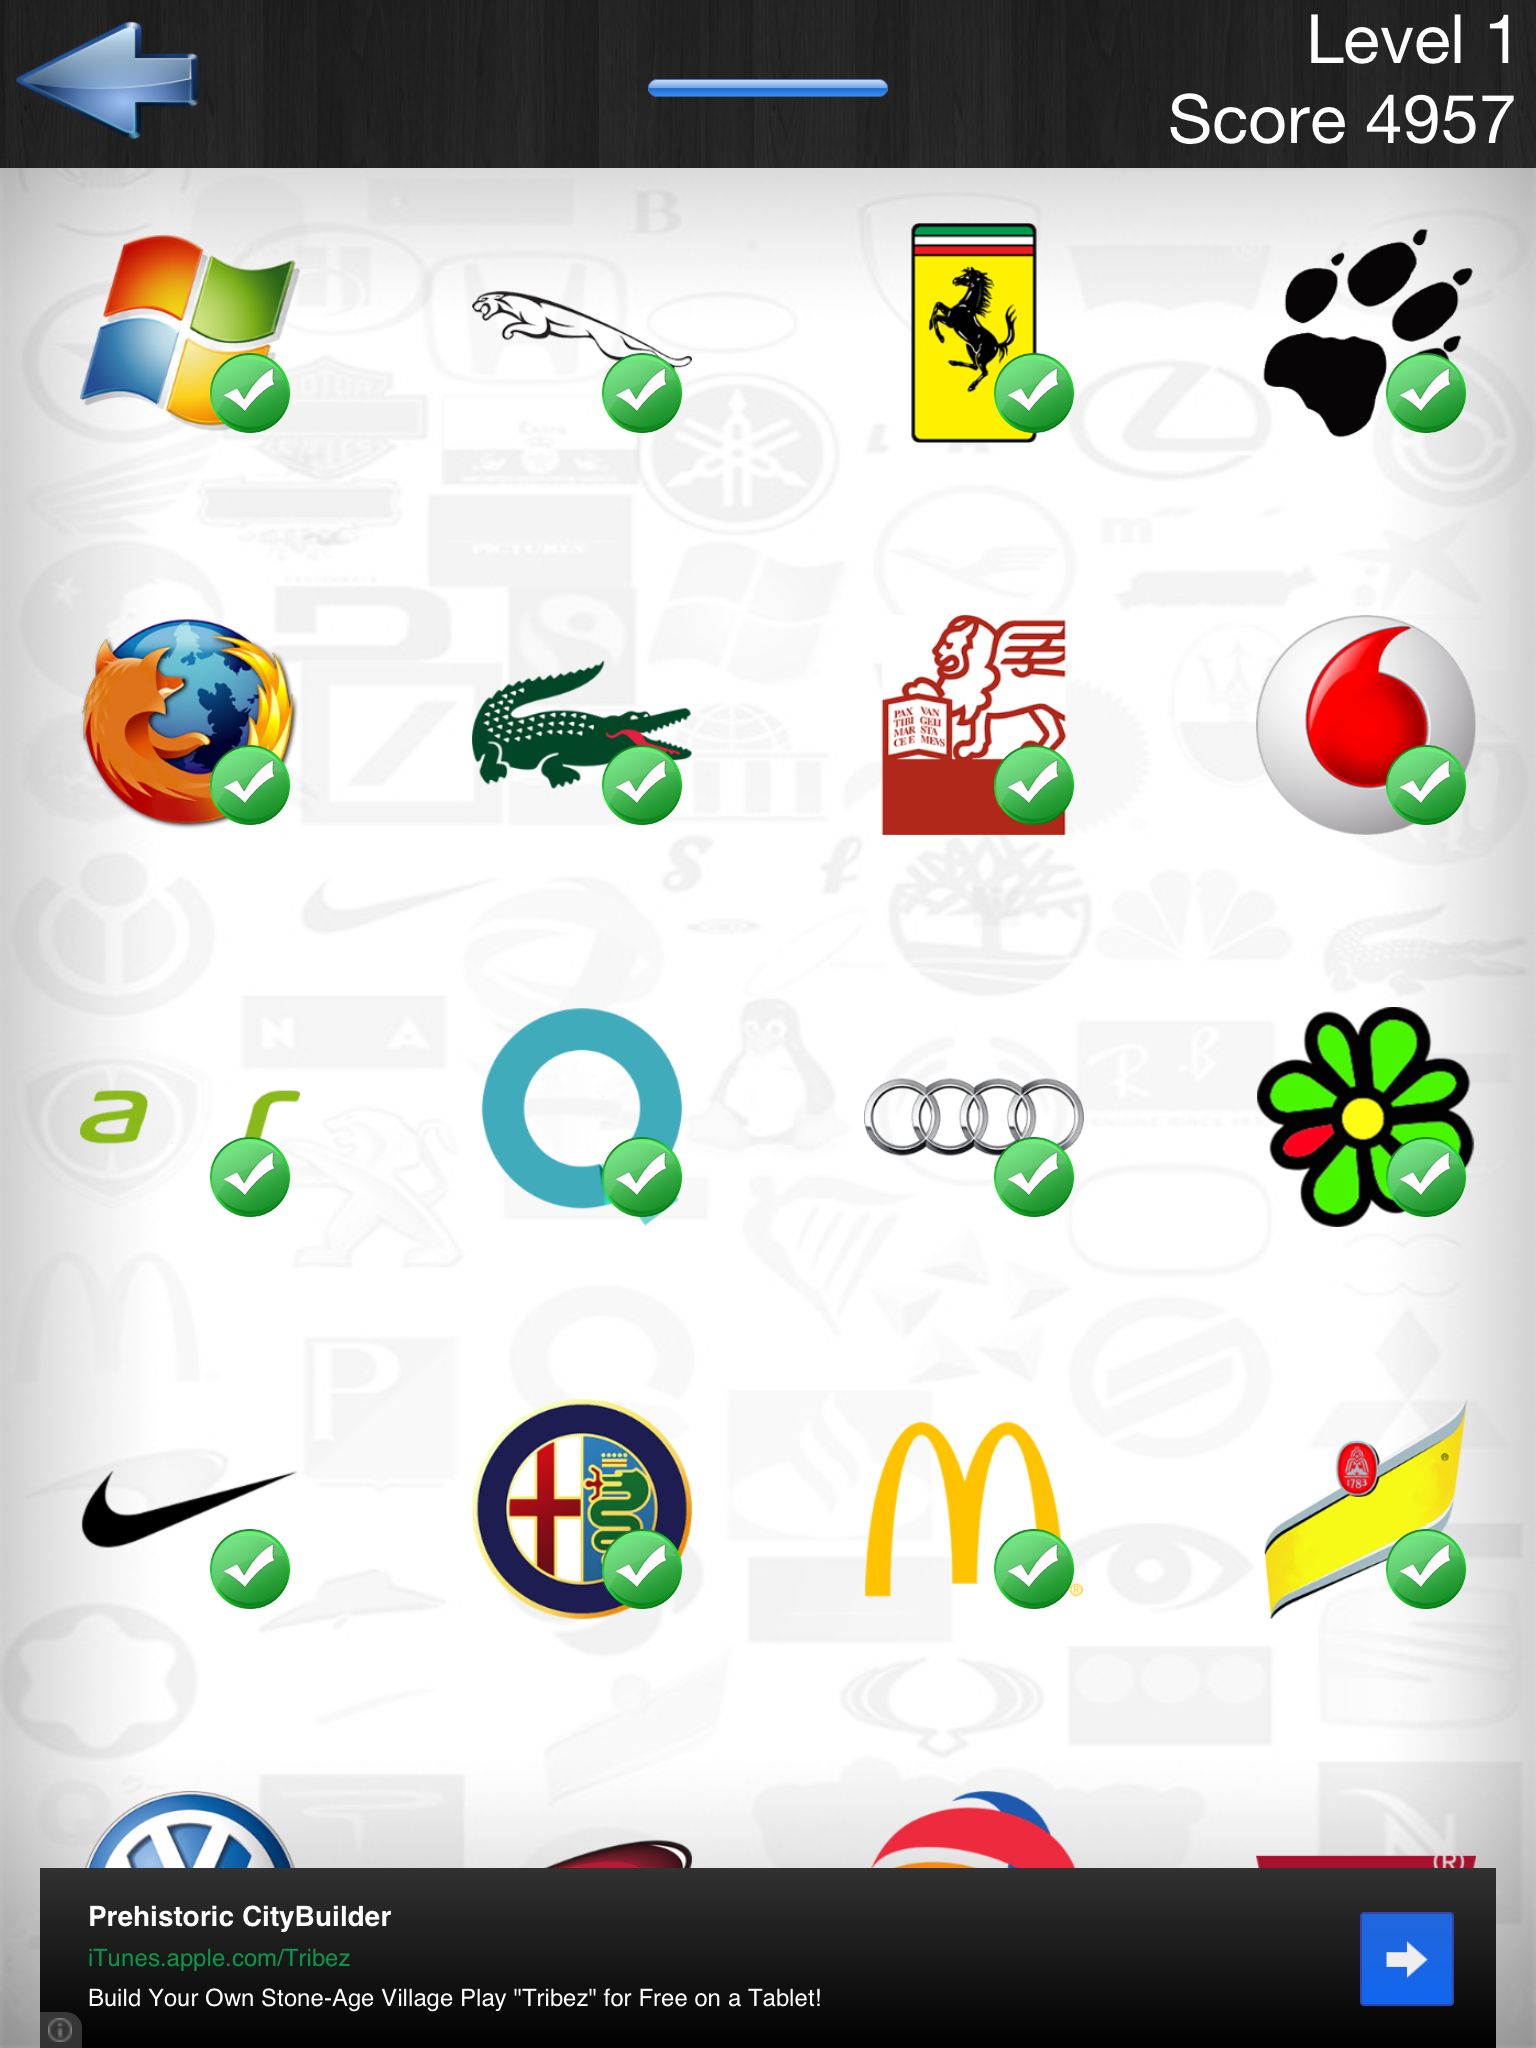 logo game answers pack 6 cheats